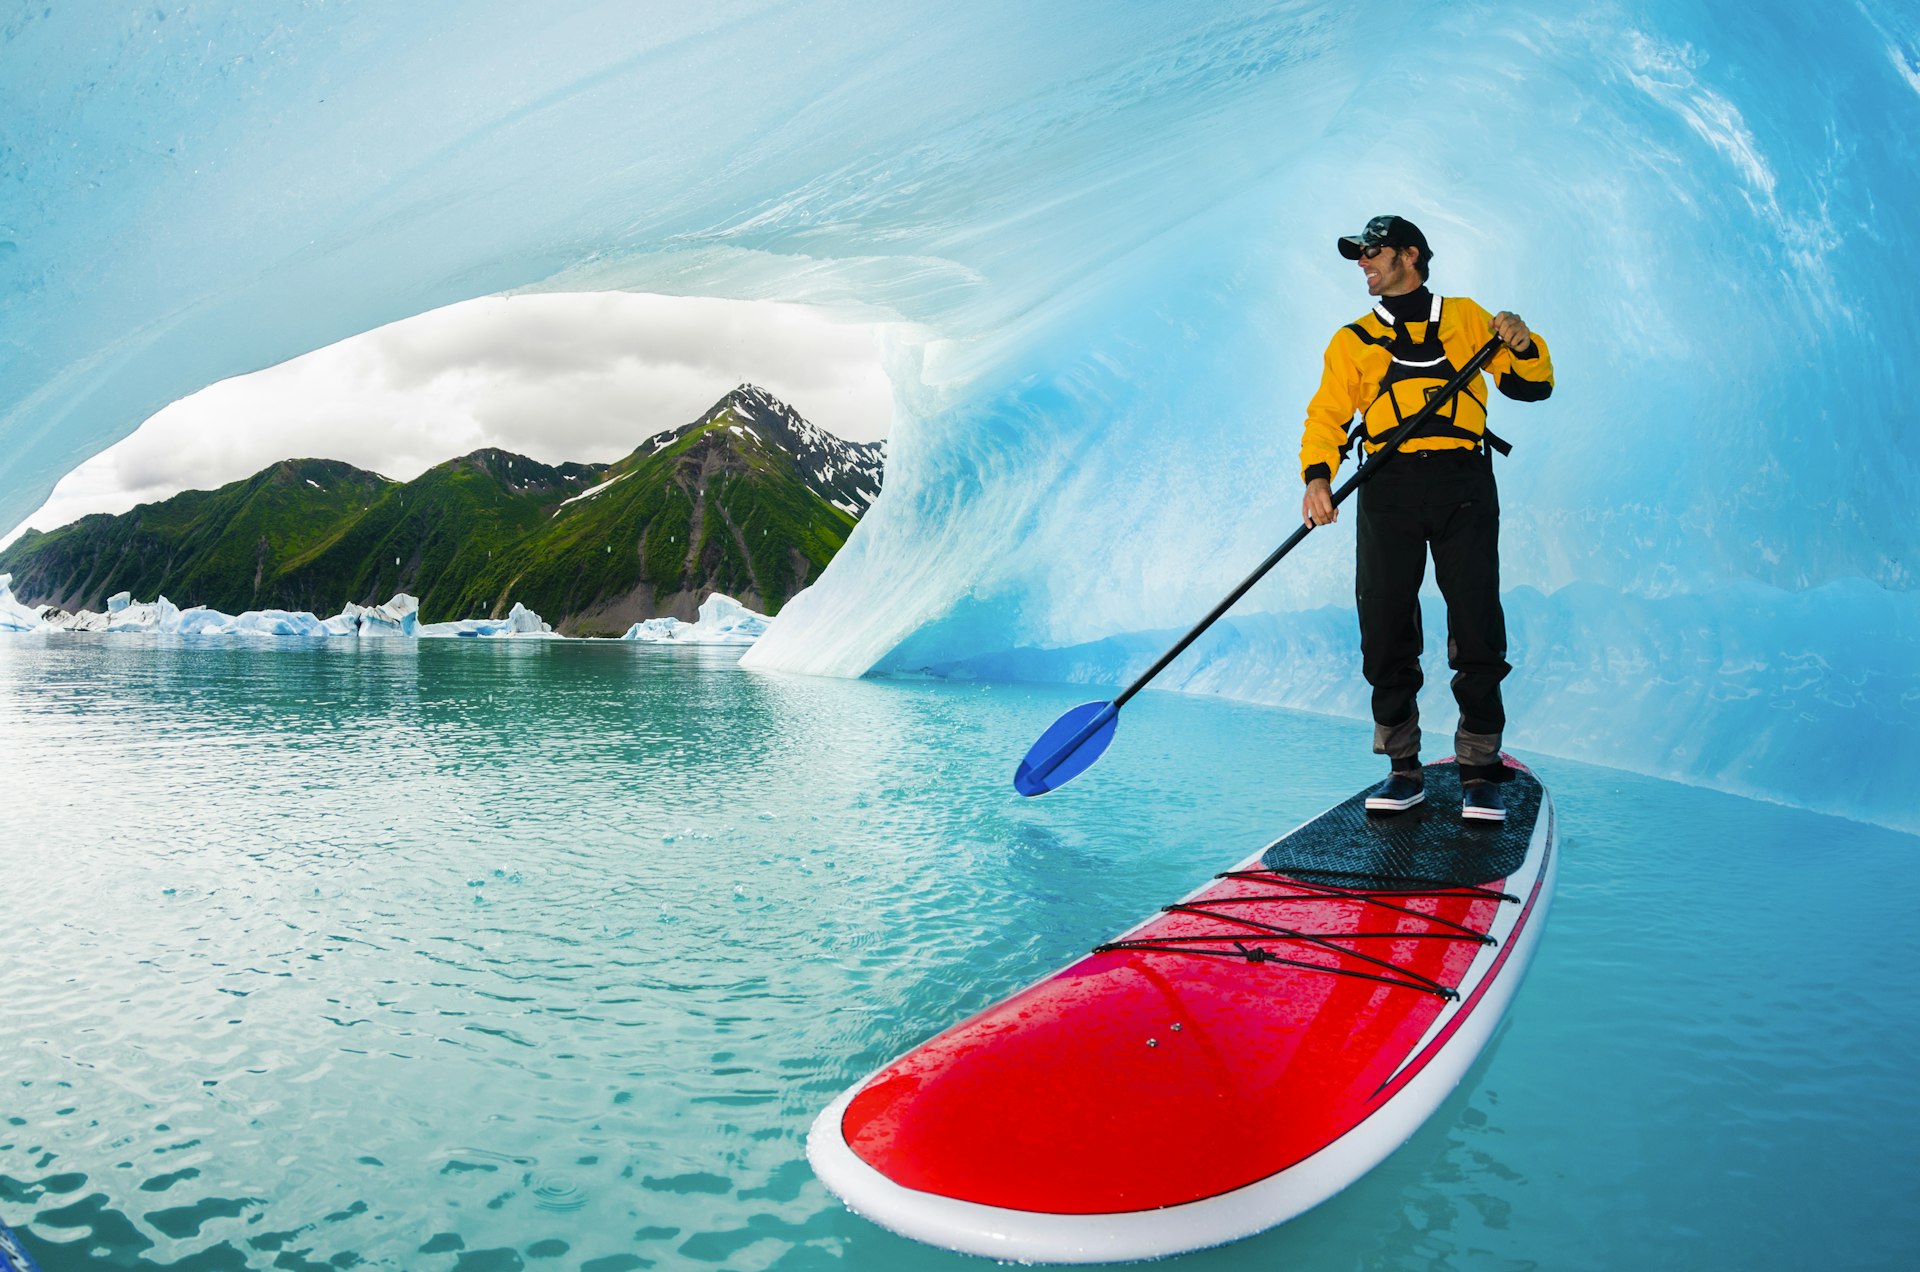 A man stand-up paddleboarding in an iceberg cavern on Bear Lake